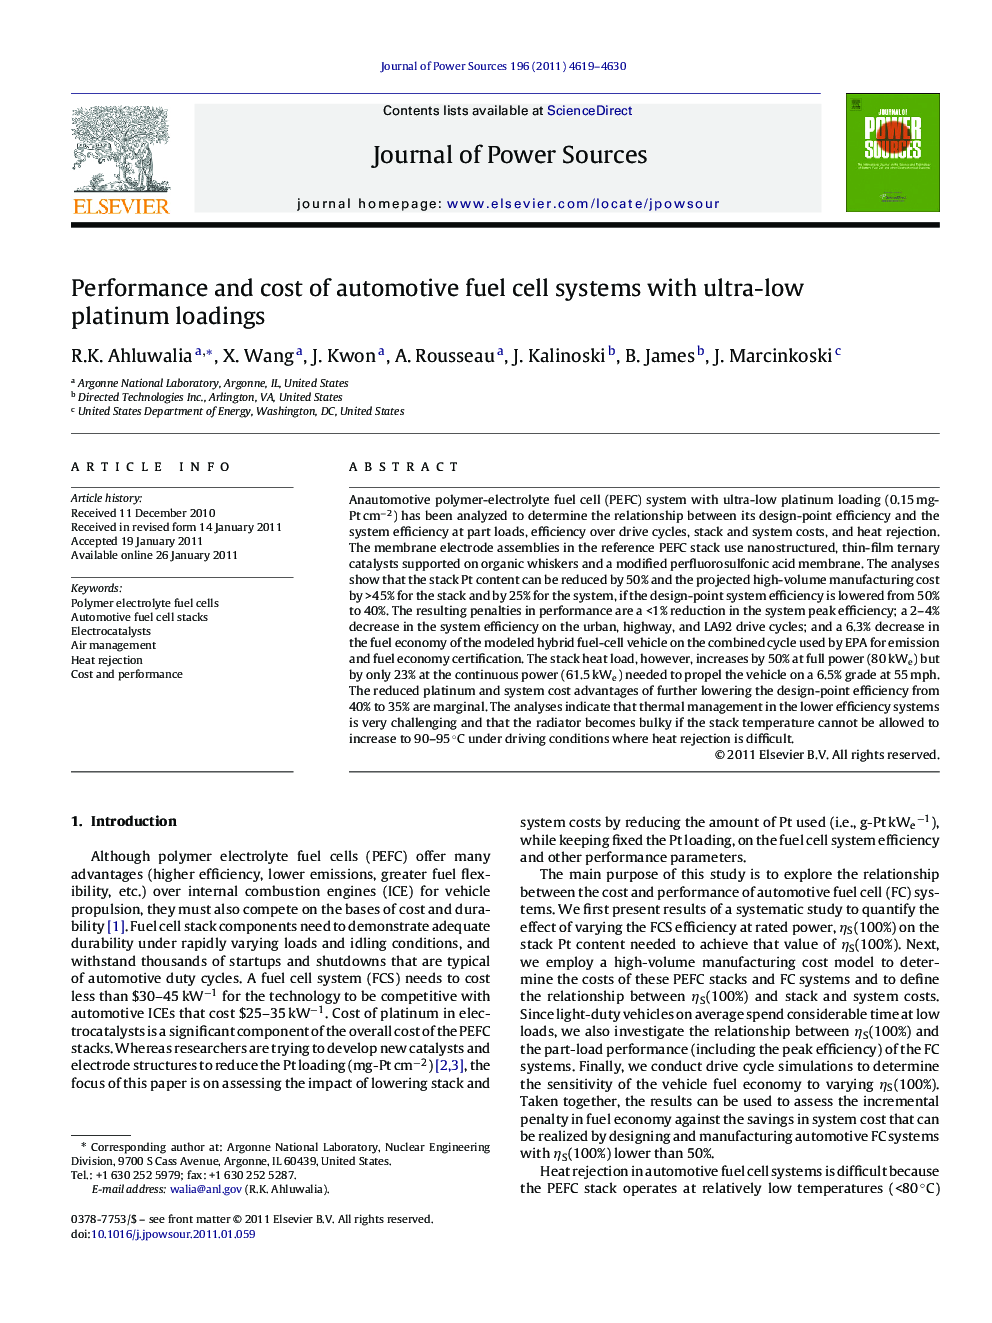 Performance and cost of automotive fuel cell systems with ultra-low platinum loadings